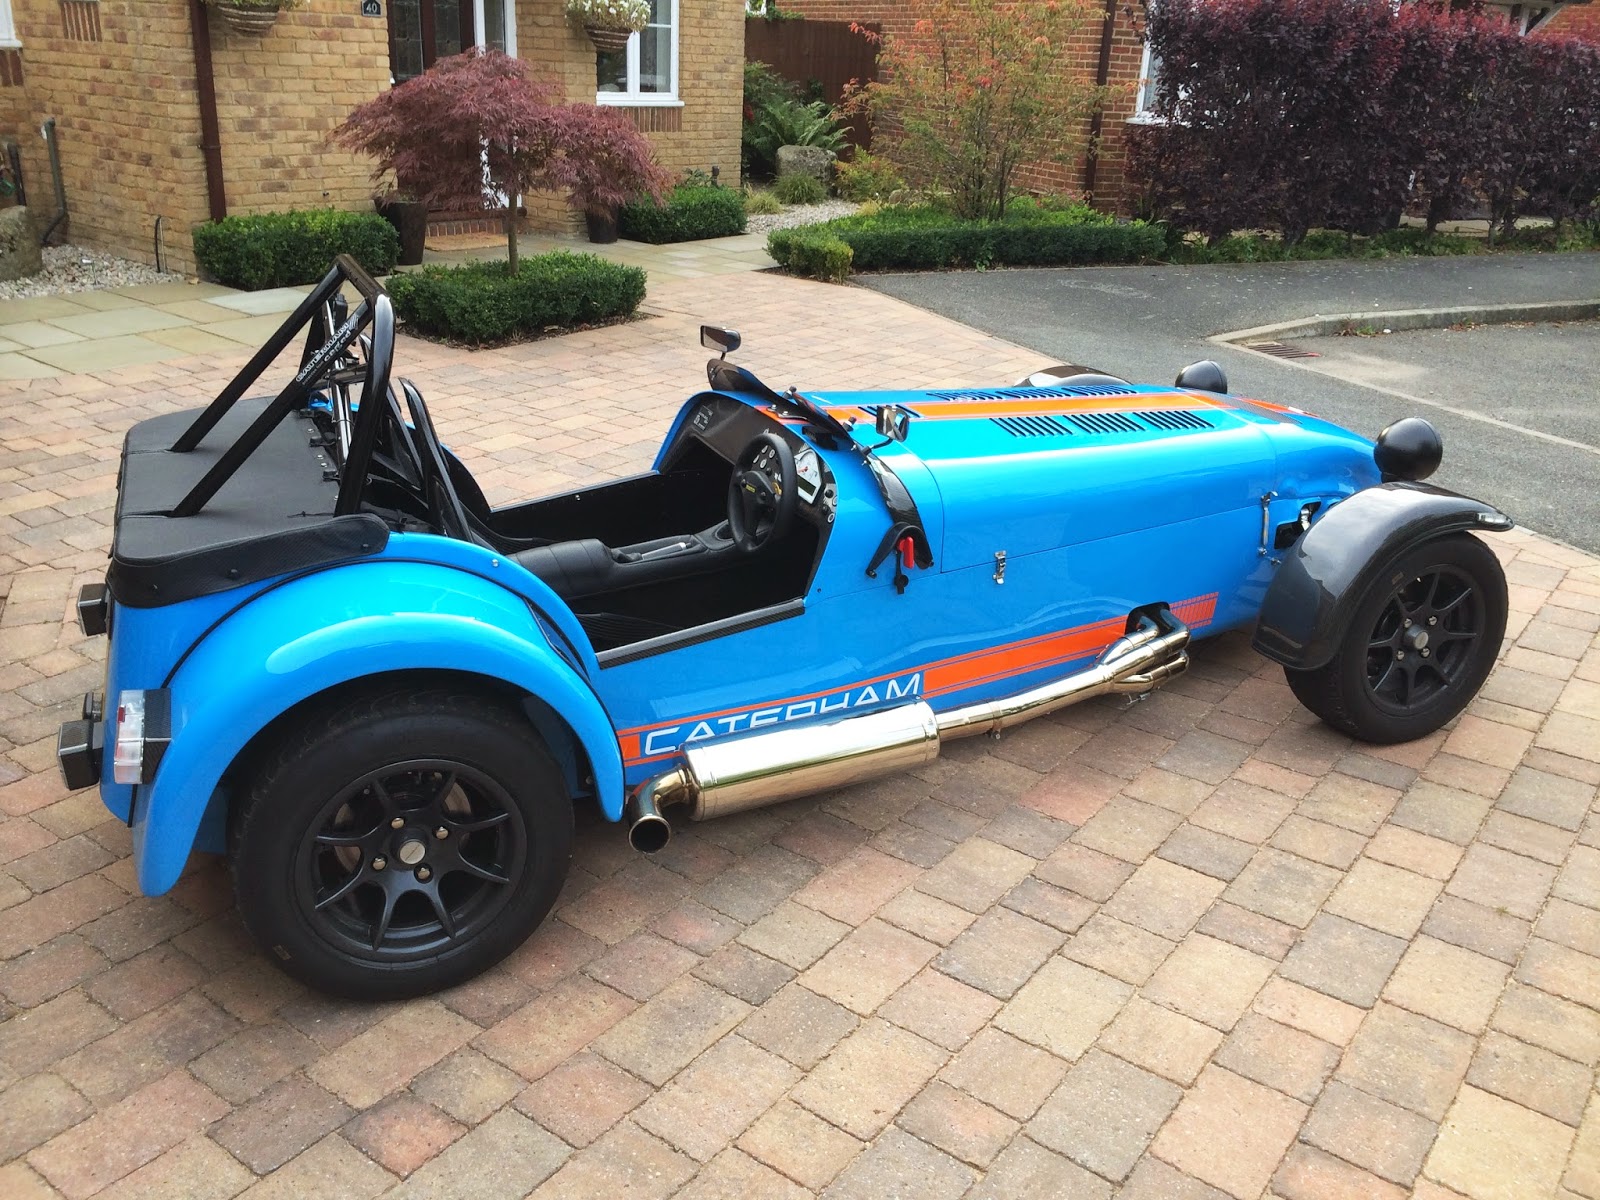 My Caterham R500 Duratec with Cat Bypass and Standard Silencer fitted.